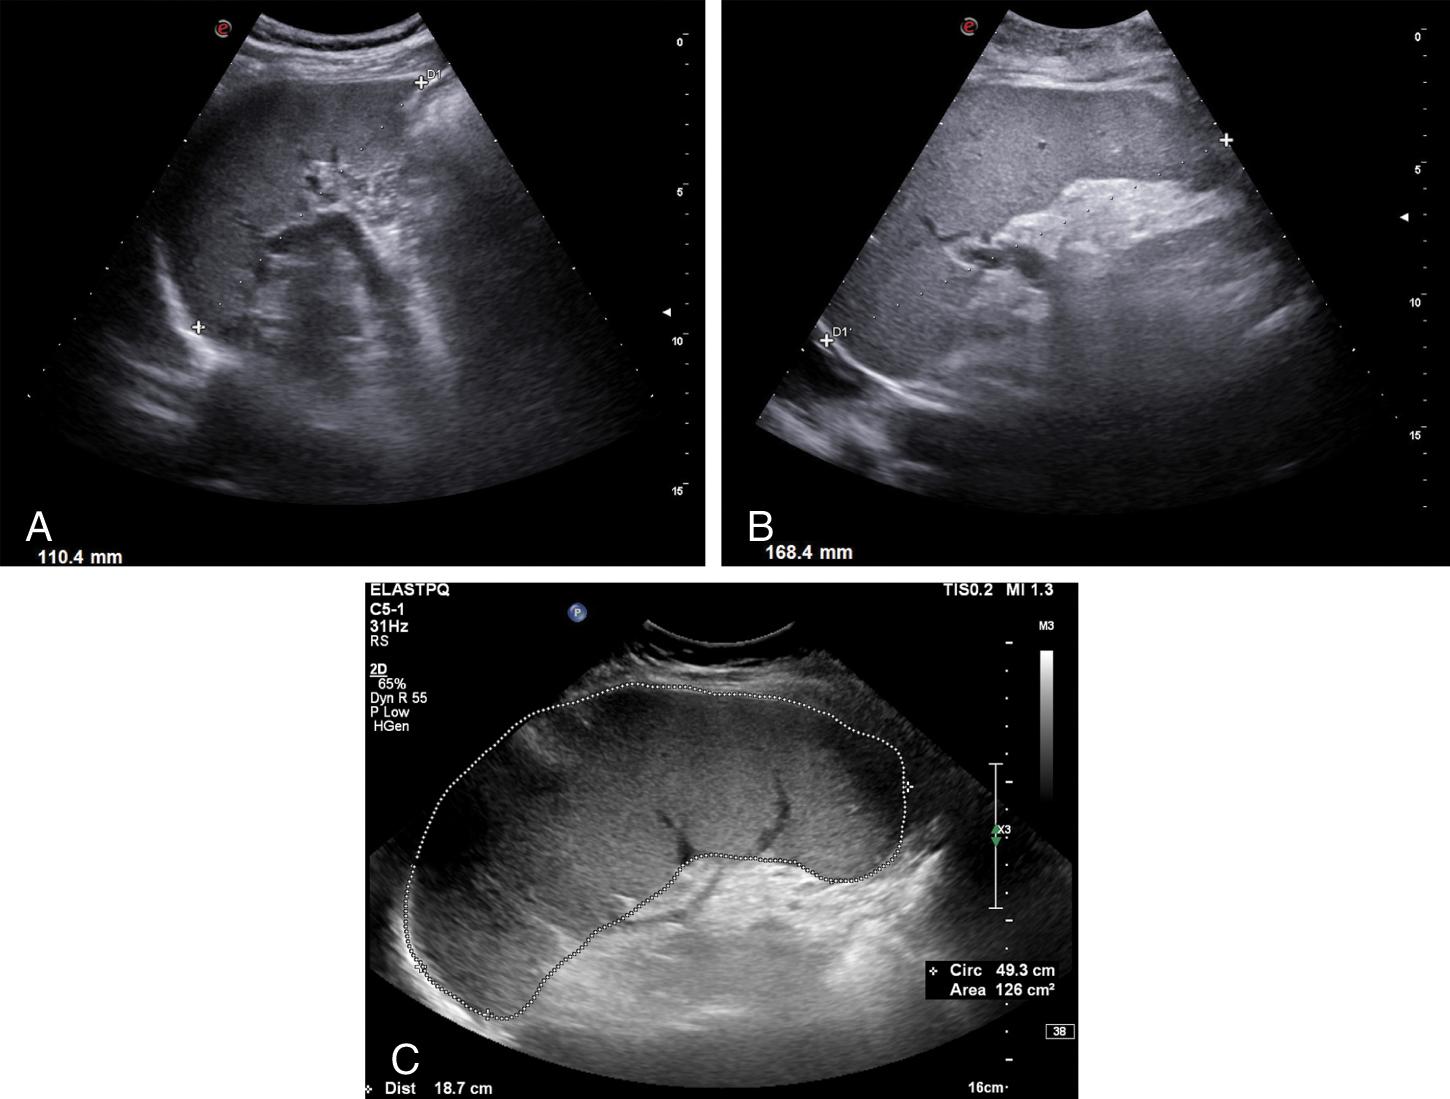 Fig. 8.3, (A) Spleen of normal size. (B) Splenomegaly (bipolar length). (C) Splenomegaly (bipolar length and area).